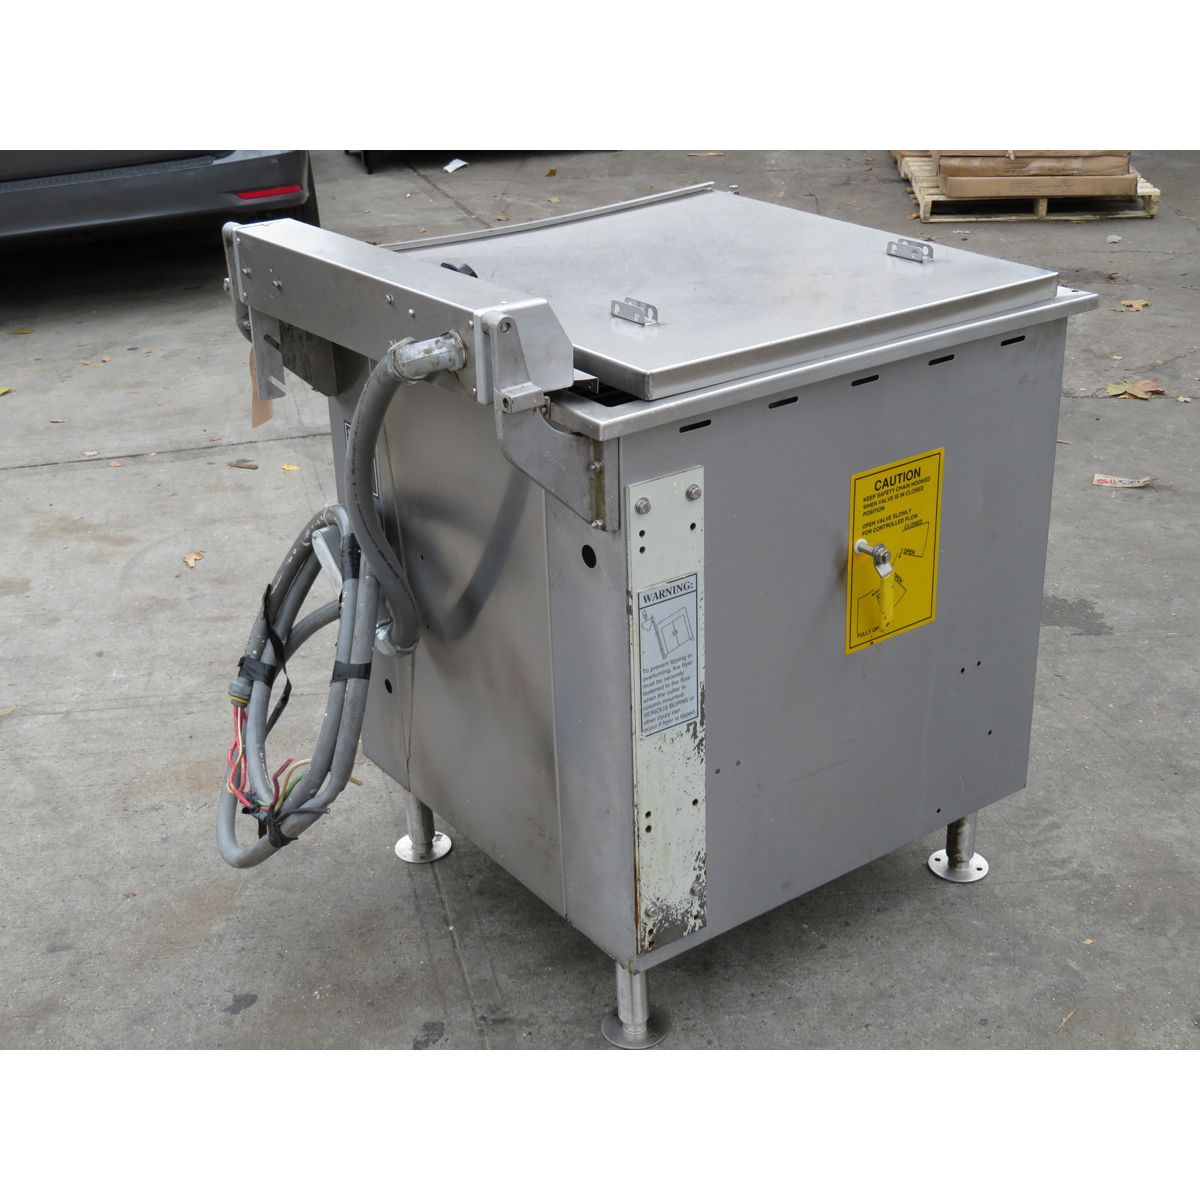 DCA RFR-124 Electric Stainless Steel Donut Fryer, Used Great Condition image 5